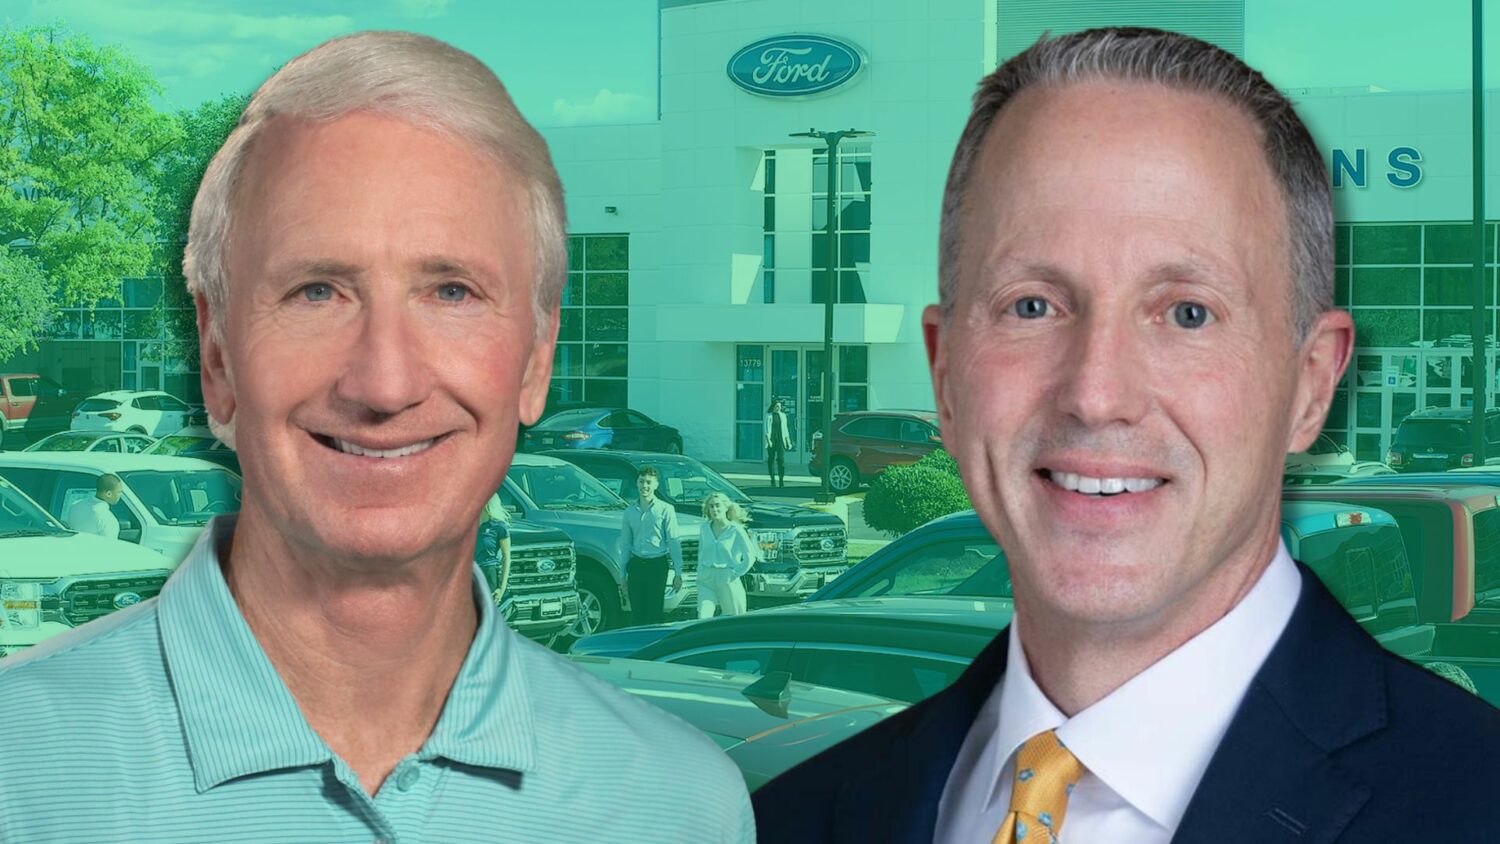 Asbury Automotive Group has agreed to acquire Jim Koons Automotive Enterprises, marking the first dealership merger of this size since 2021.